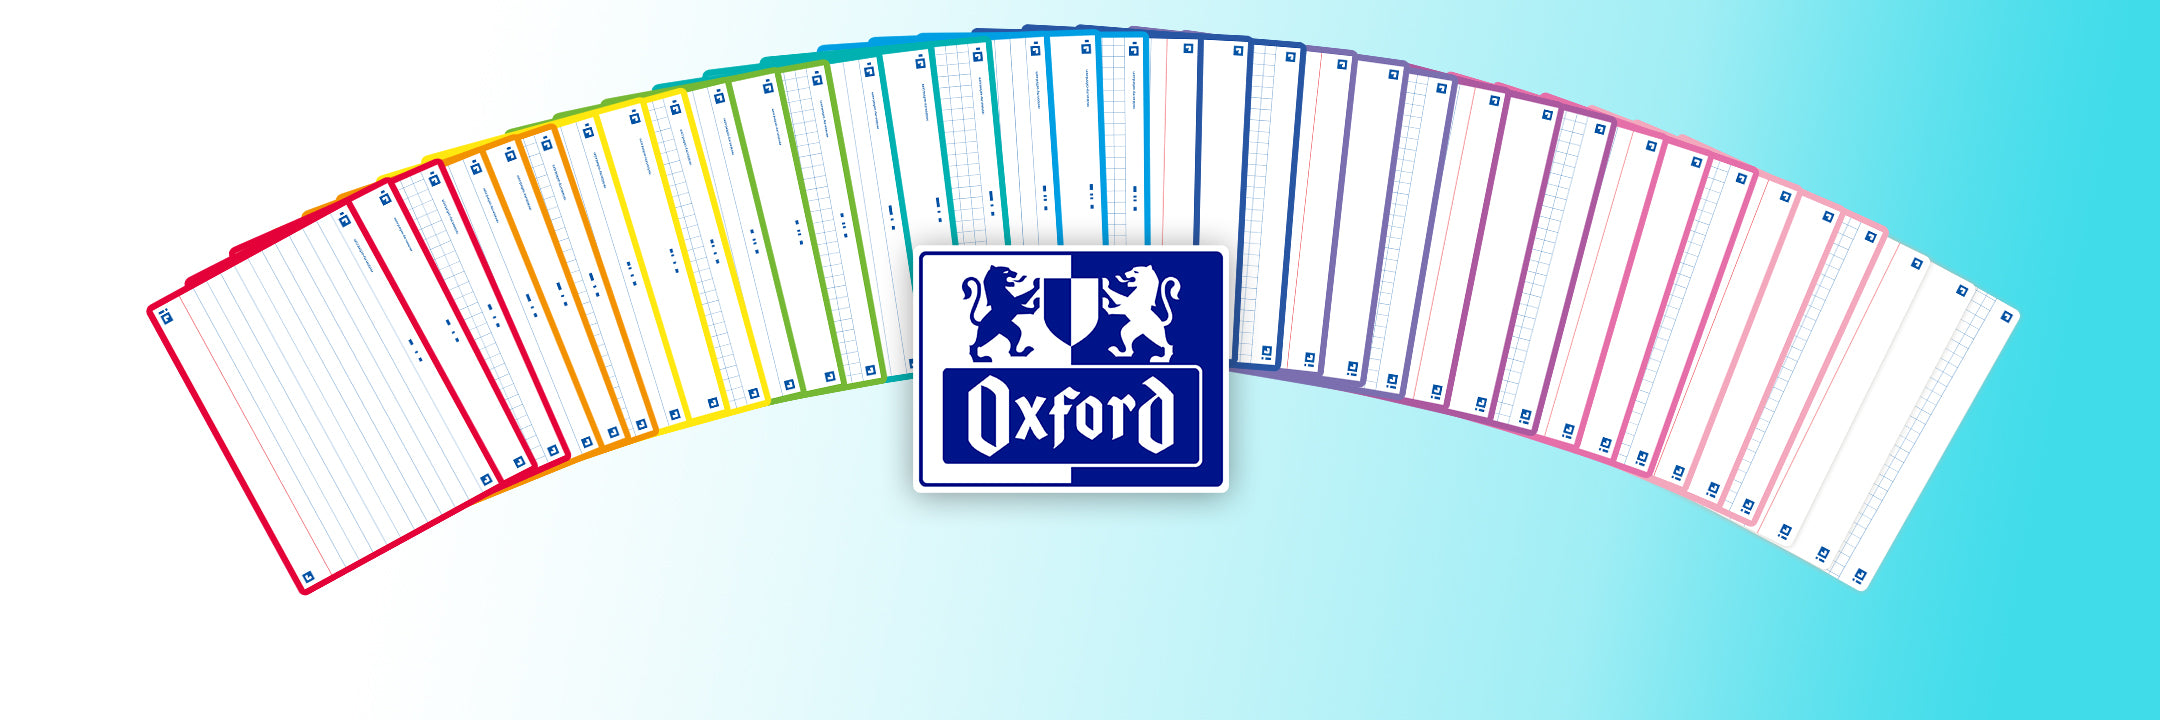 How to study your OXFORD Flash 2.0 Flashcards with the quiz mode